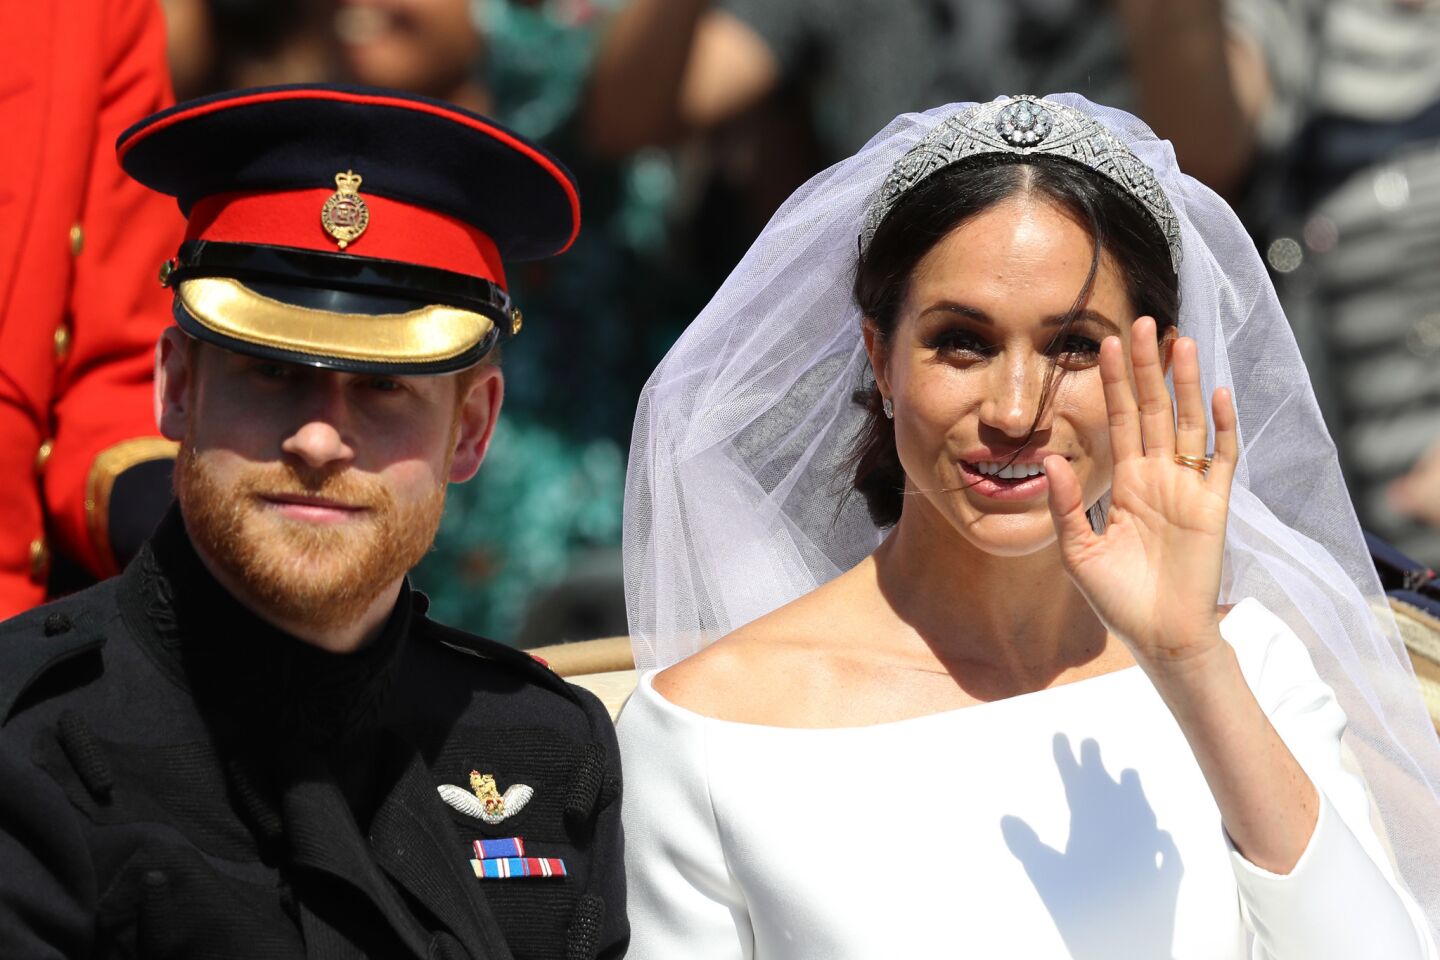 Meghan Markle marries Prince Harry wearing a wedding dress designed by ...